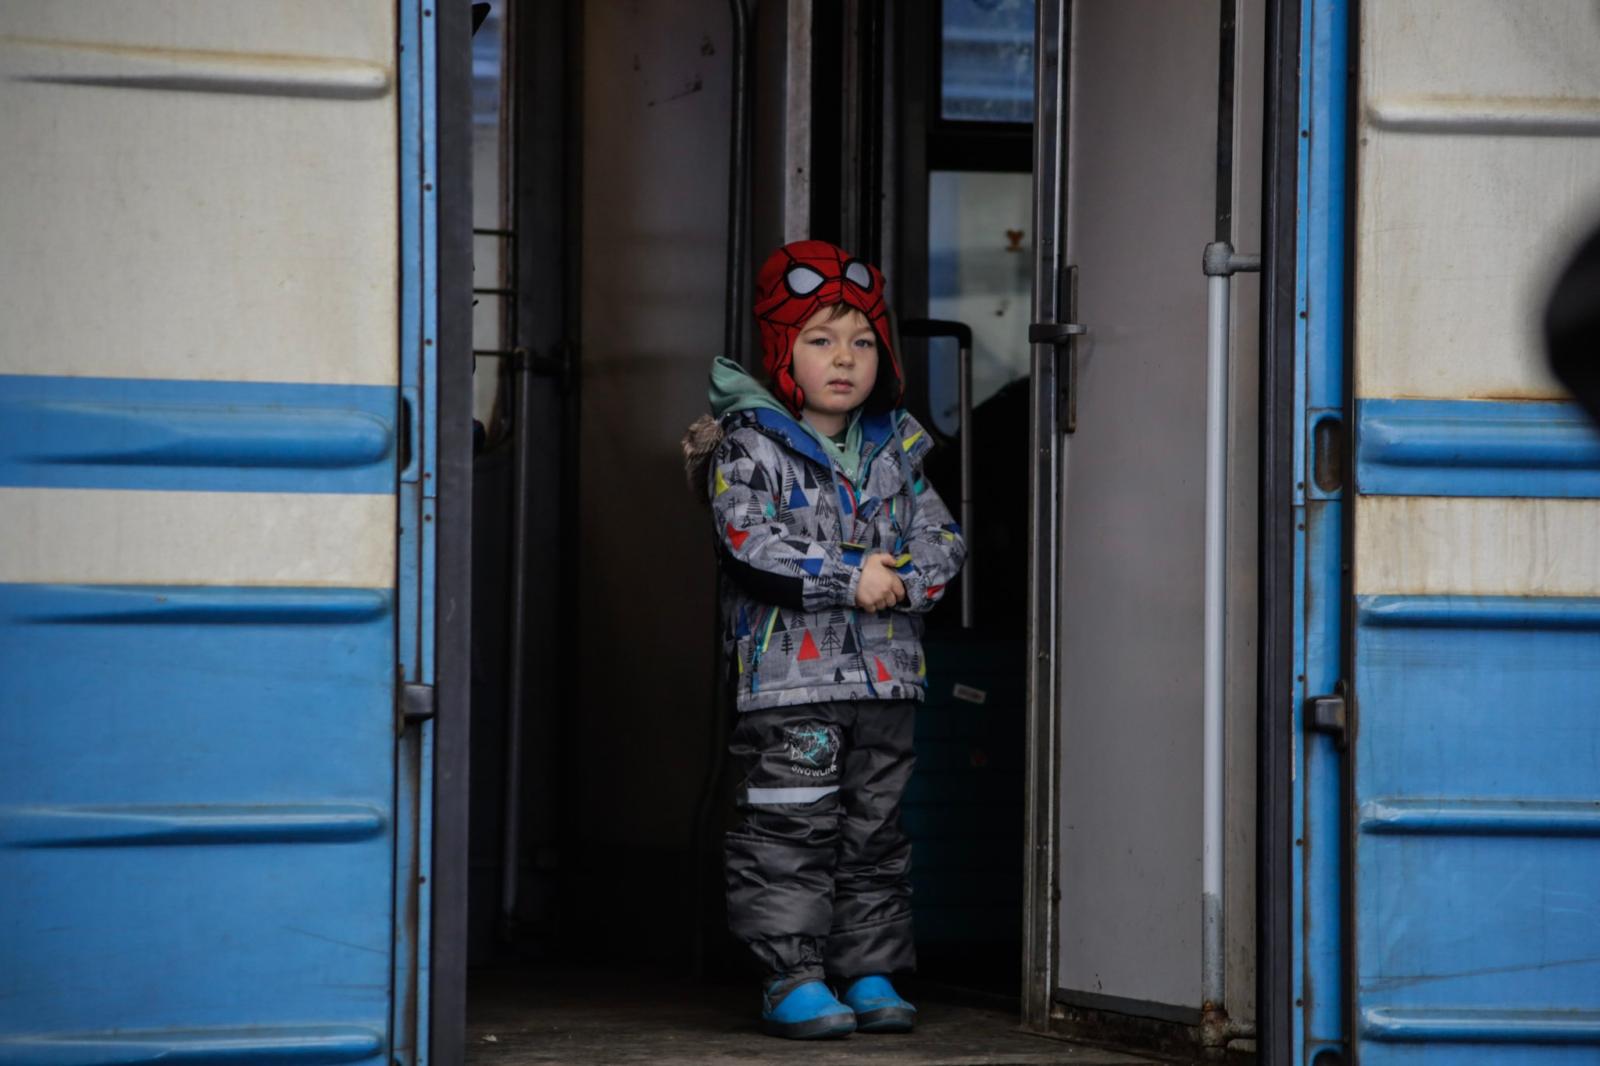 A boy dressed in a Spider-Man hat watches people on the platform of the station in Lviv, Ukraine....